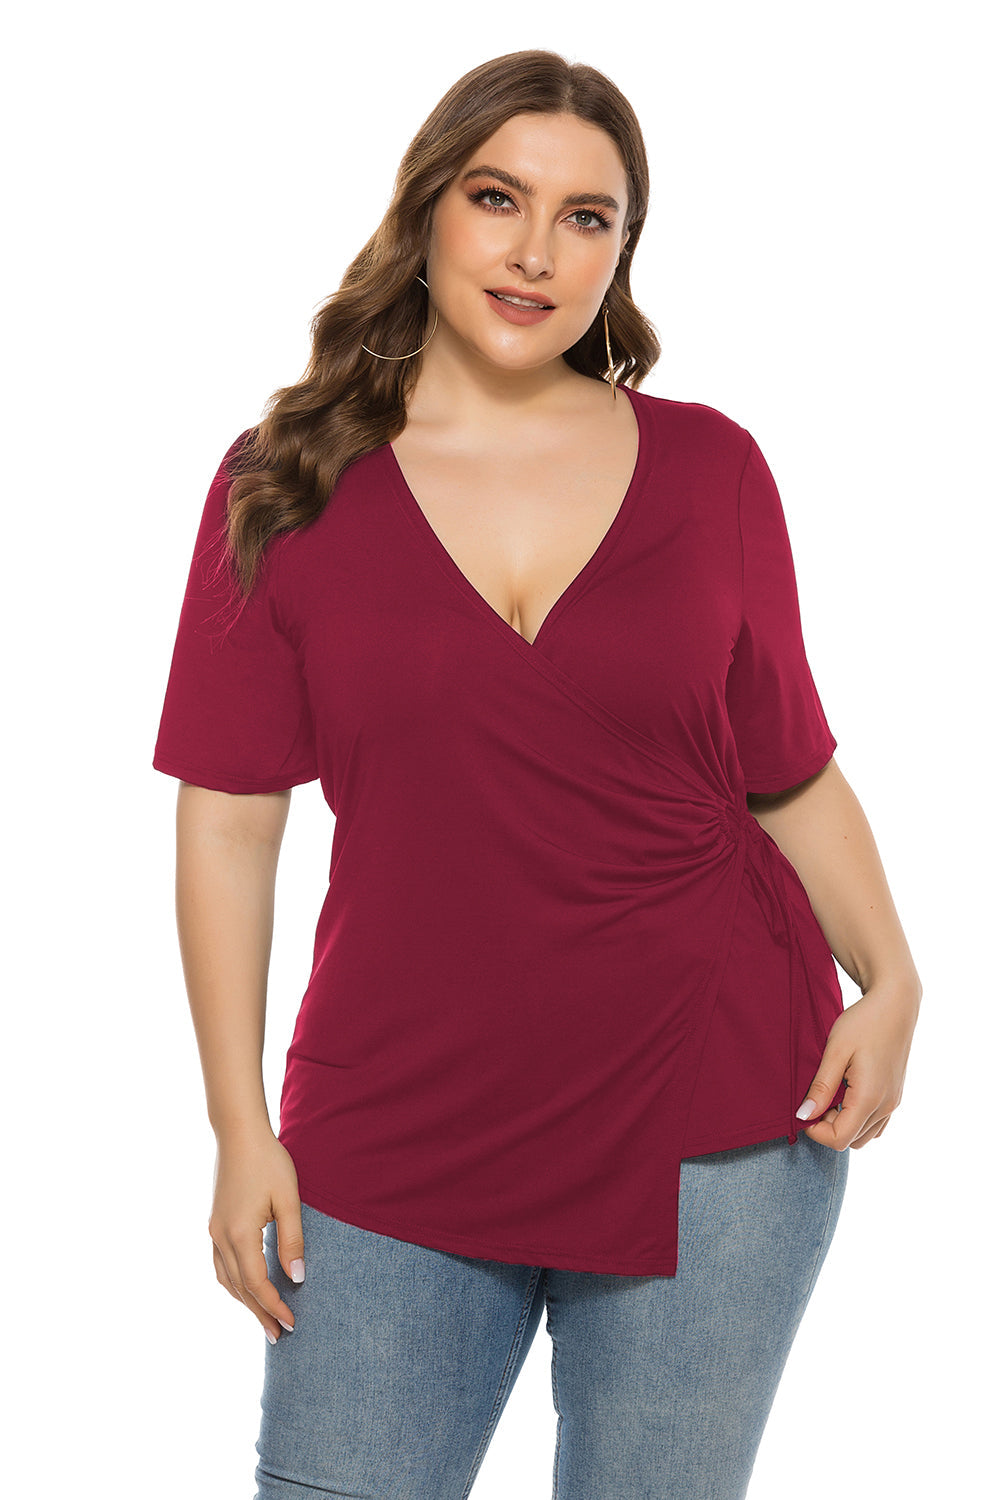 Fashion Women's Summer New Pure solid Color Top Plus Size V Neck Strappy Shirt Blouse Sai Feel